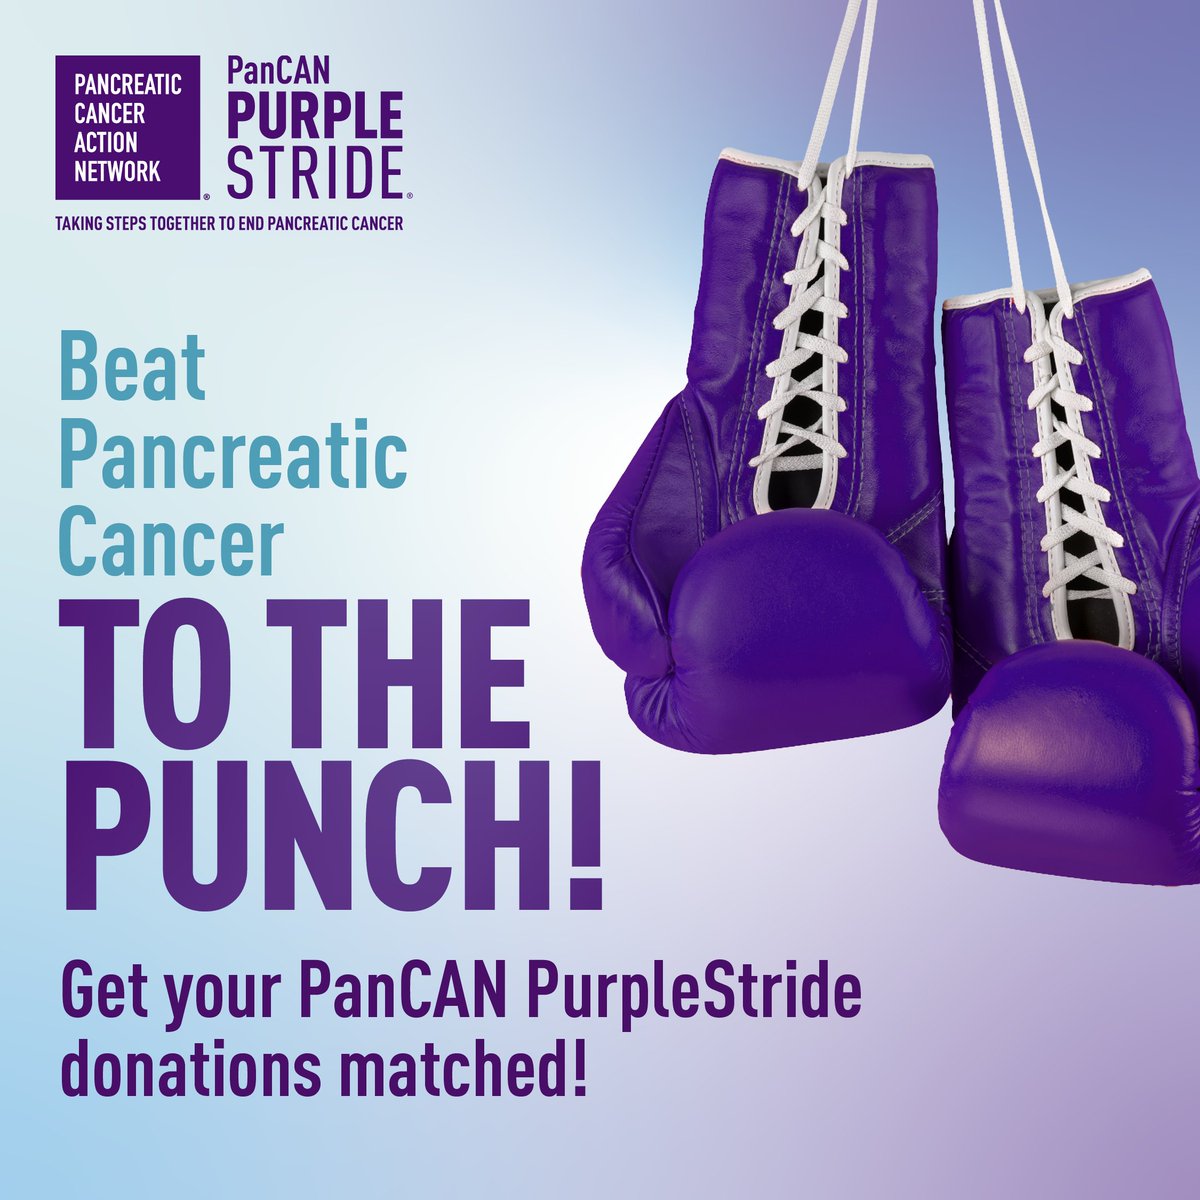 There's still time to get your #PanCANPurpleStride donations matched! 🥊💜 Thanks to a generous $100,000 gift from the Daniel J. Kobasic Foundation in memory of Daniel J. Kobasic, PurpleStride donations will be matched, dollar for dollar, up to $100 per donation until the…